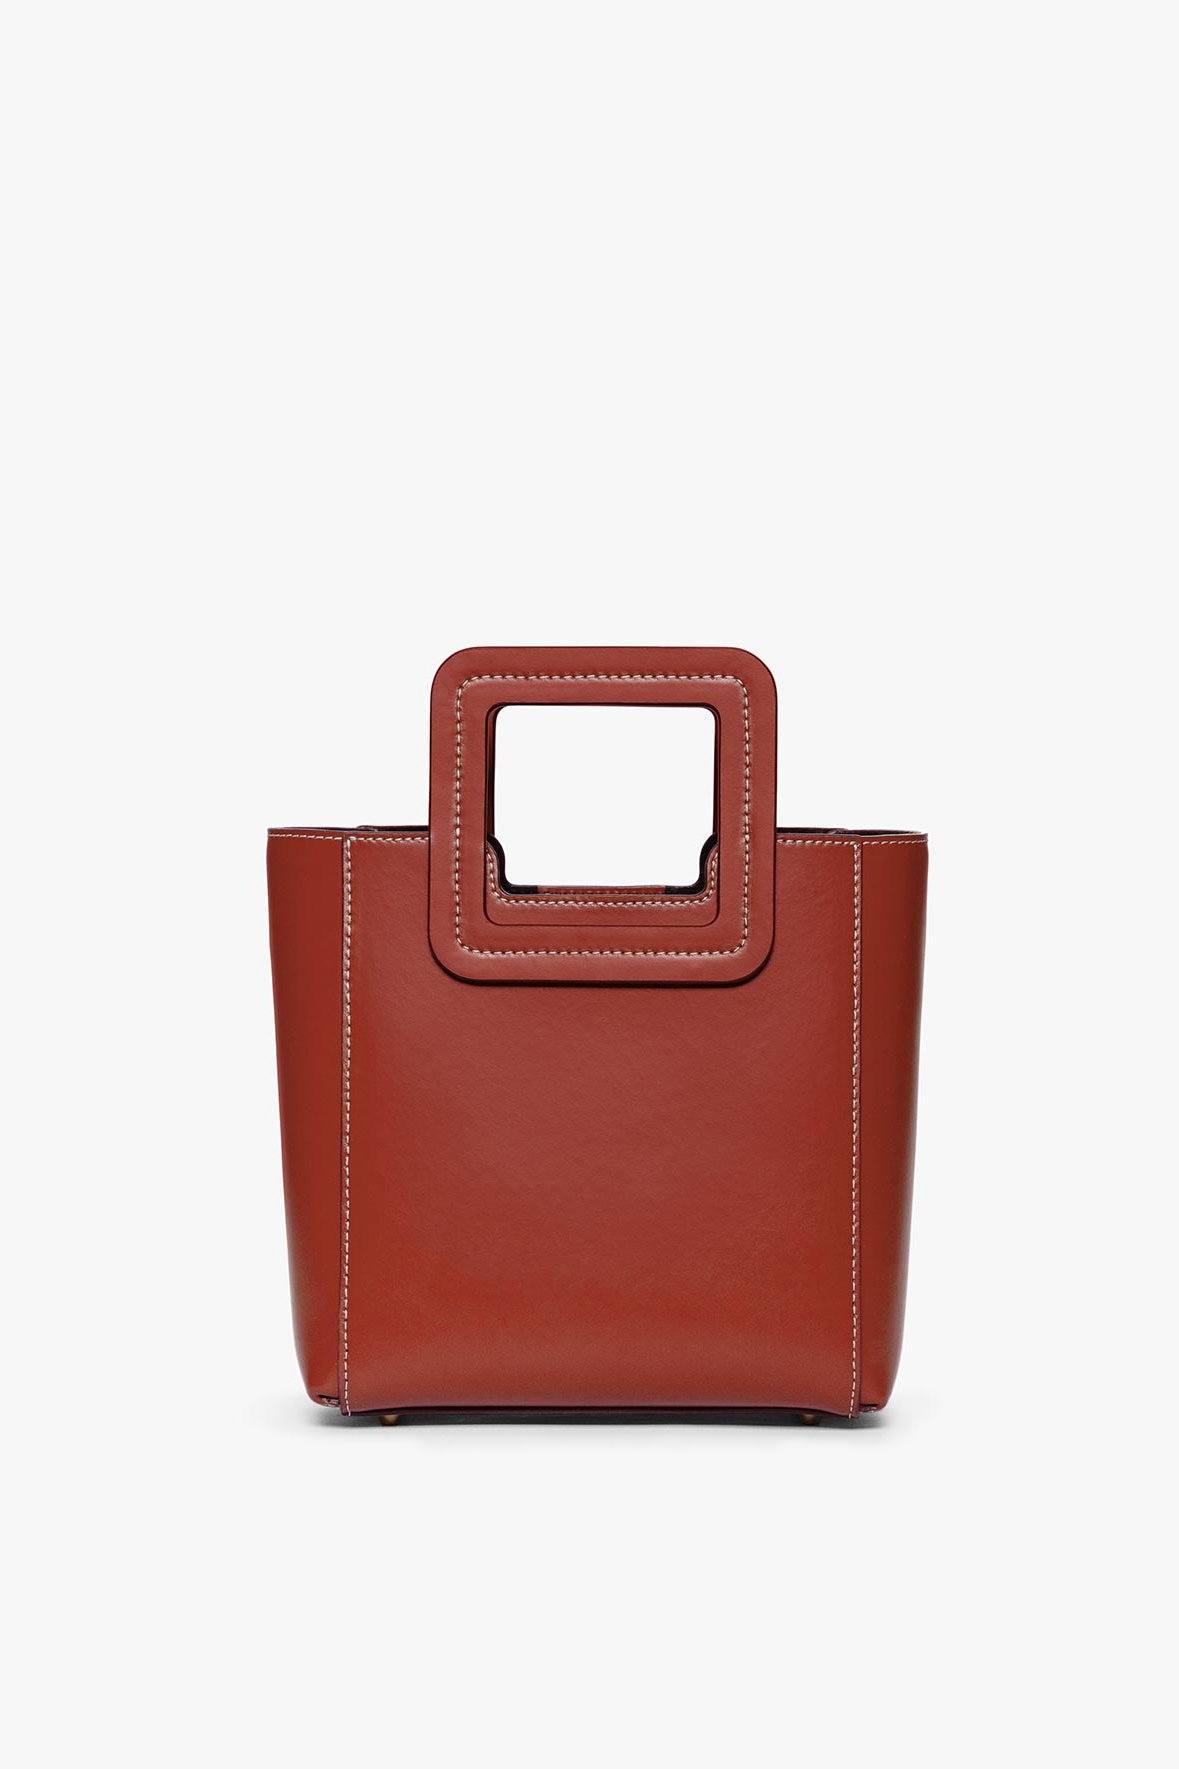 STAUD, Mini Shirley Leather Bag for Female in Pine Polished